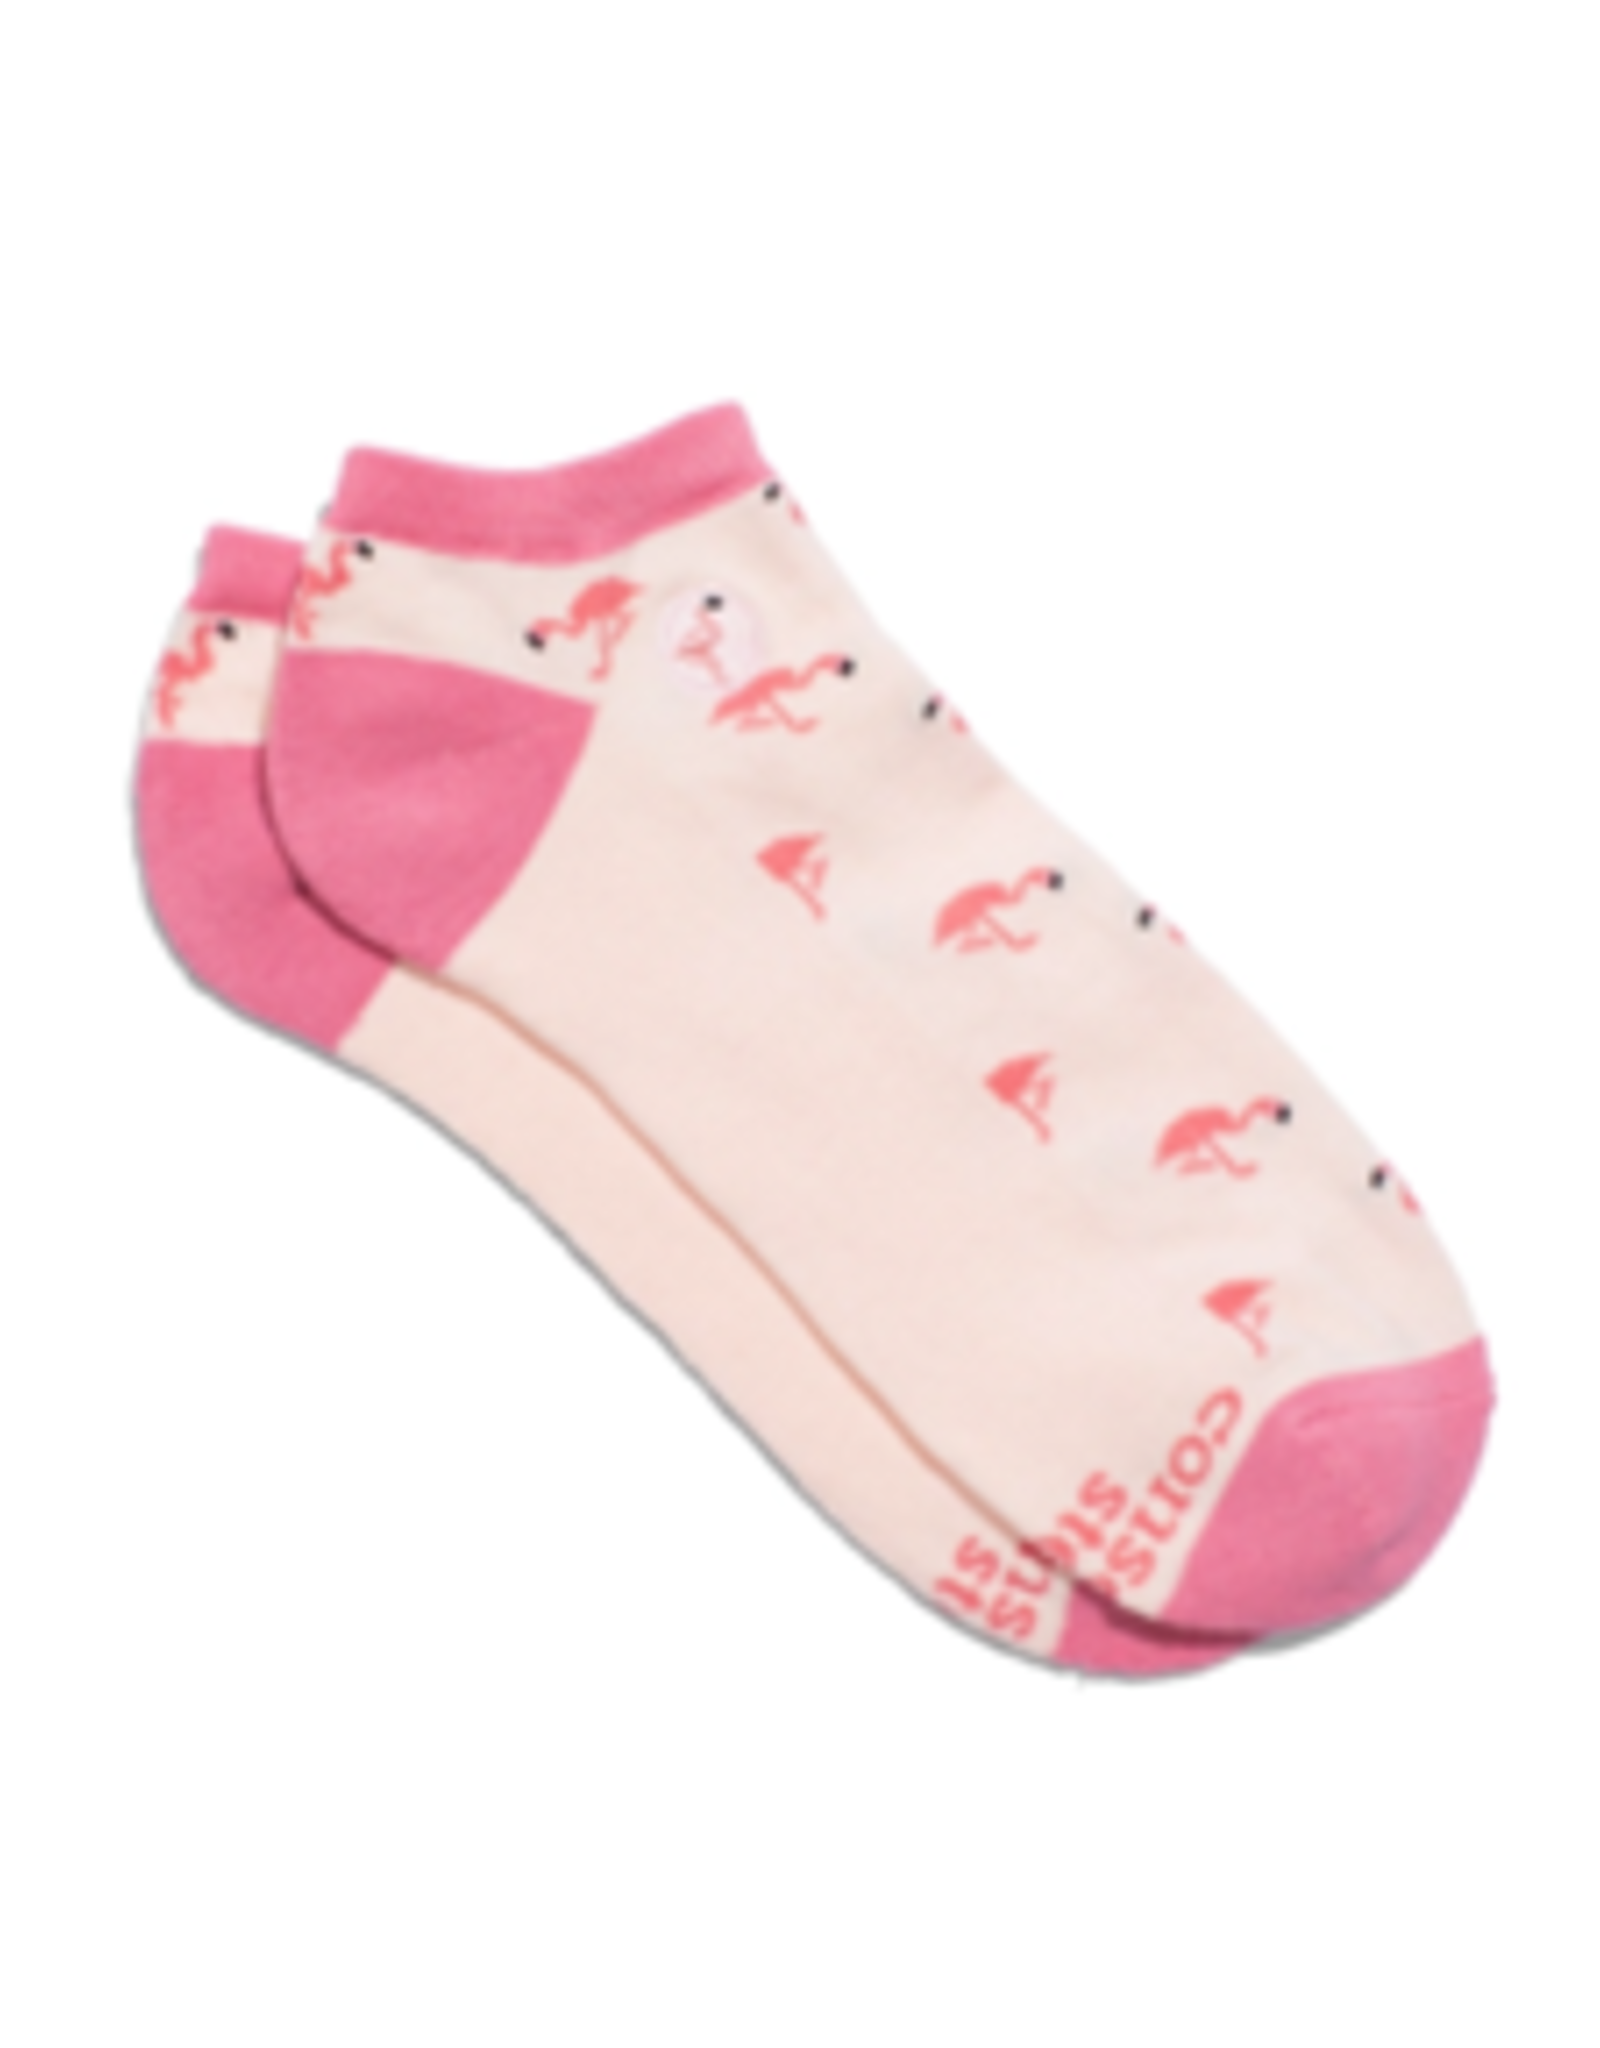 Conscious Step Ankle Socks That Protect Flamingos- M